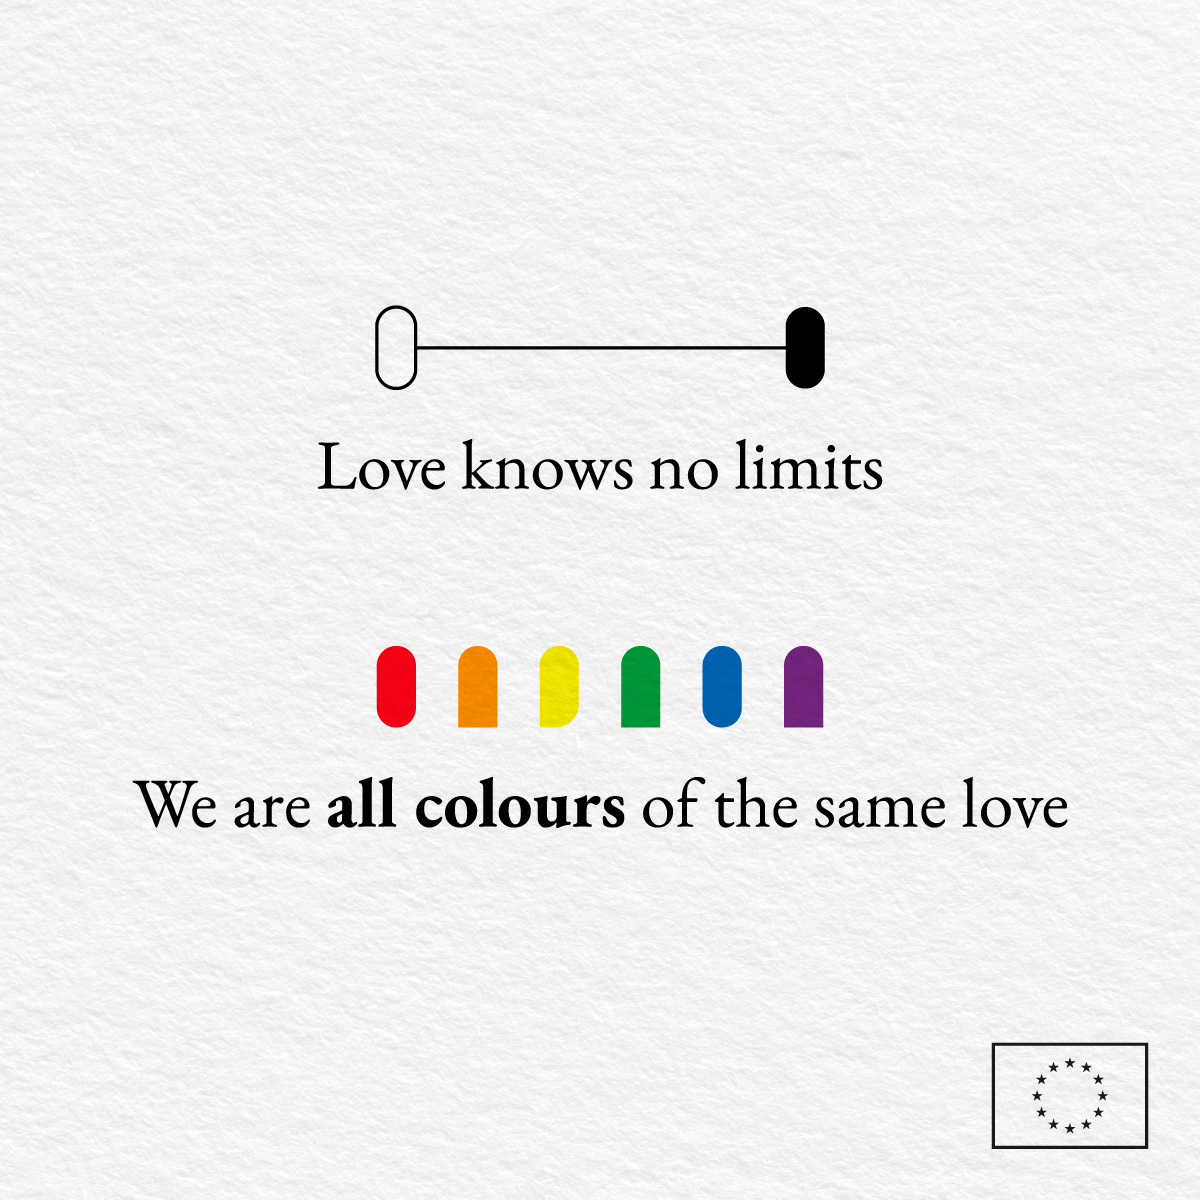 An image with a white background showing the LGBTIQ+ rainbow colours in different shapes arranged close together. A text overlay reads: 